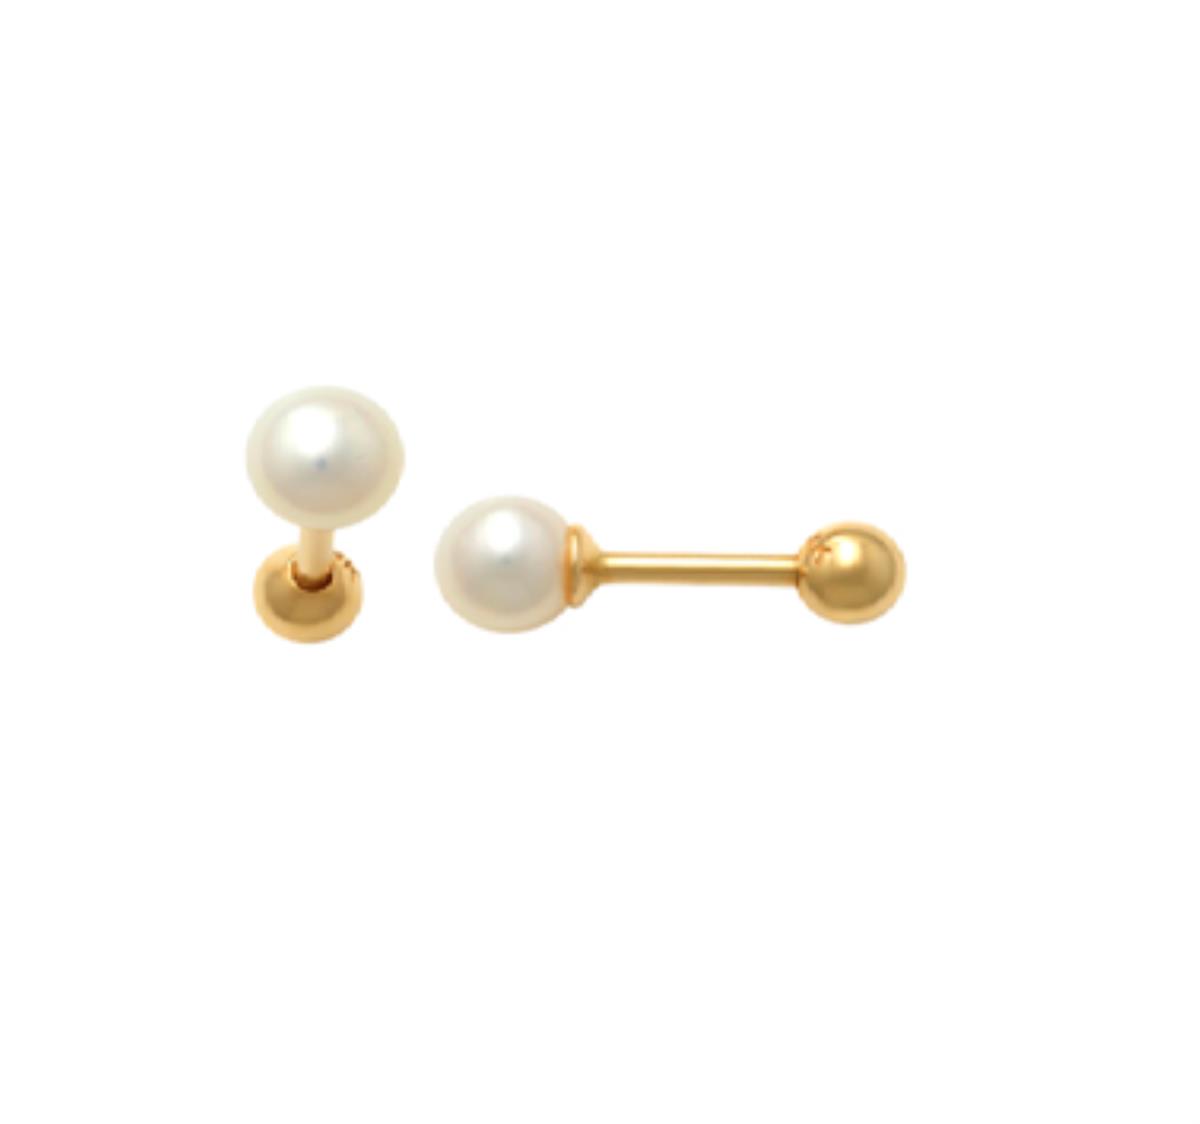 10K Yellow Gold 4mm Freshwater Pearl Nose Stud with Ball Screw-Back